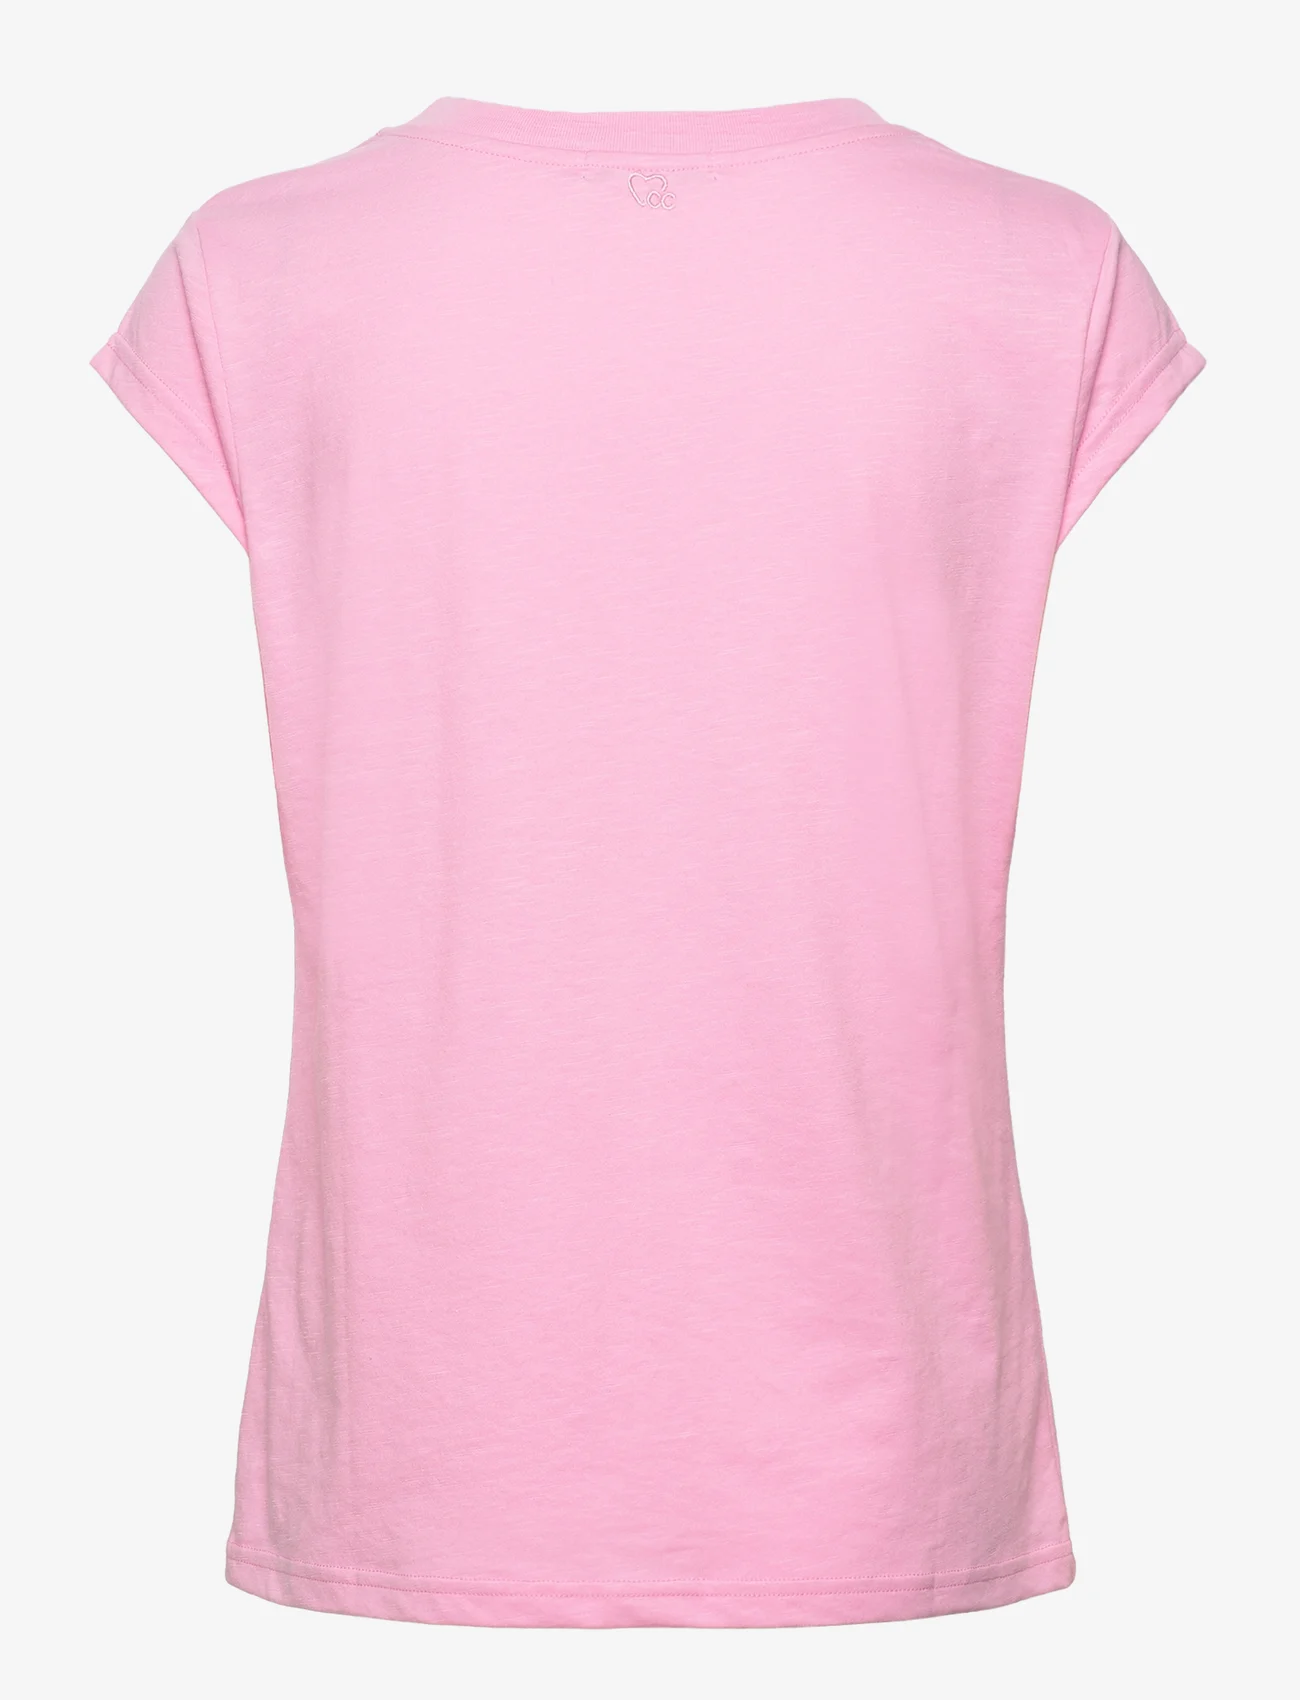 Coster Copenhagen - CC Heart basic t-shirt - lowest prices - baby pink - 1